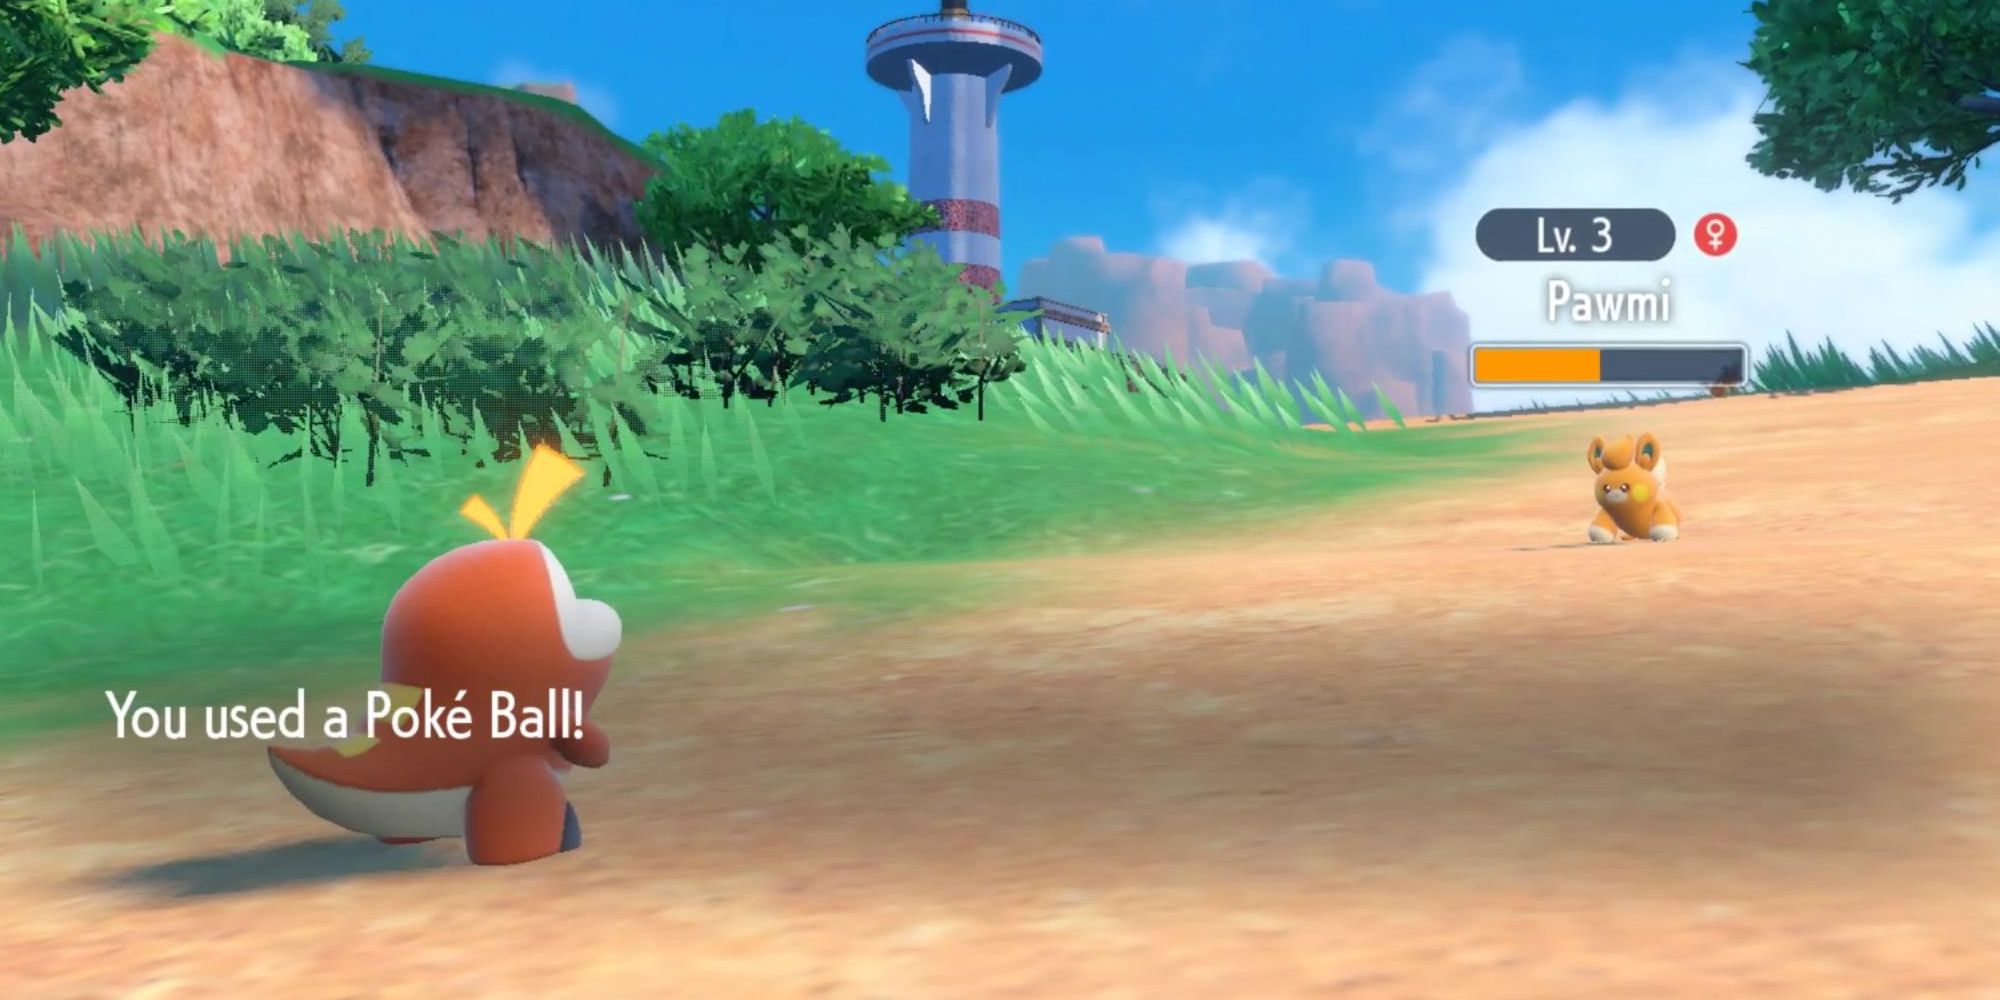 A player throwing a Poke Ball at a Pawmi battling a Fuecoco